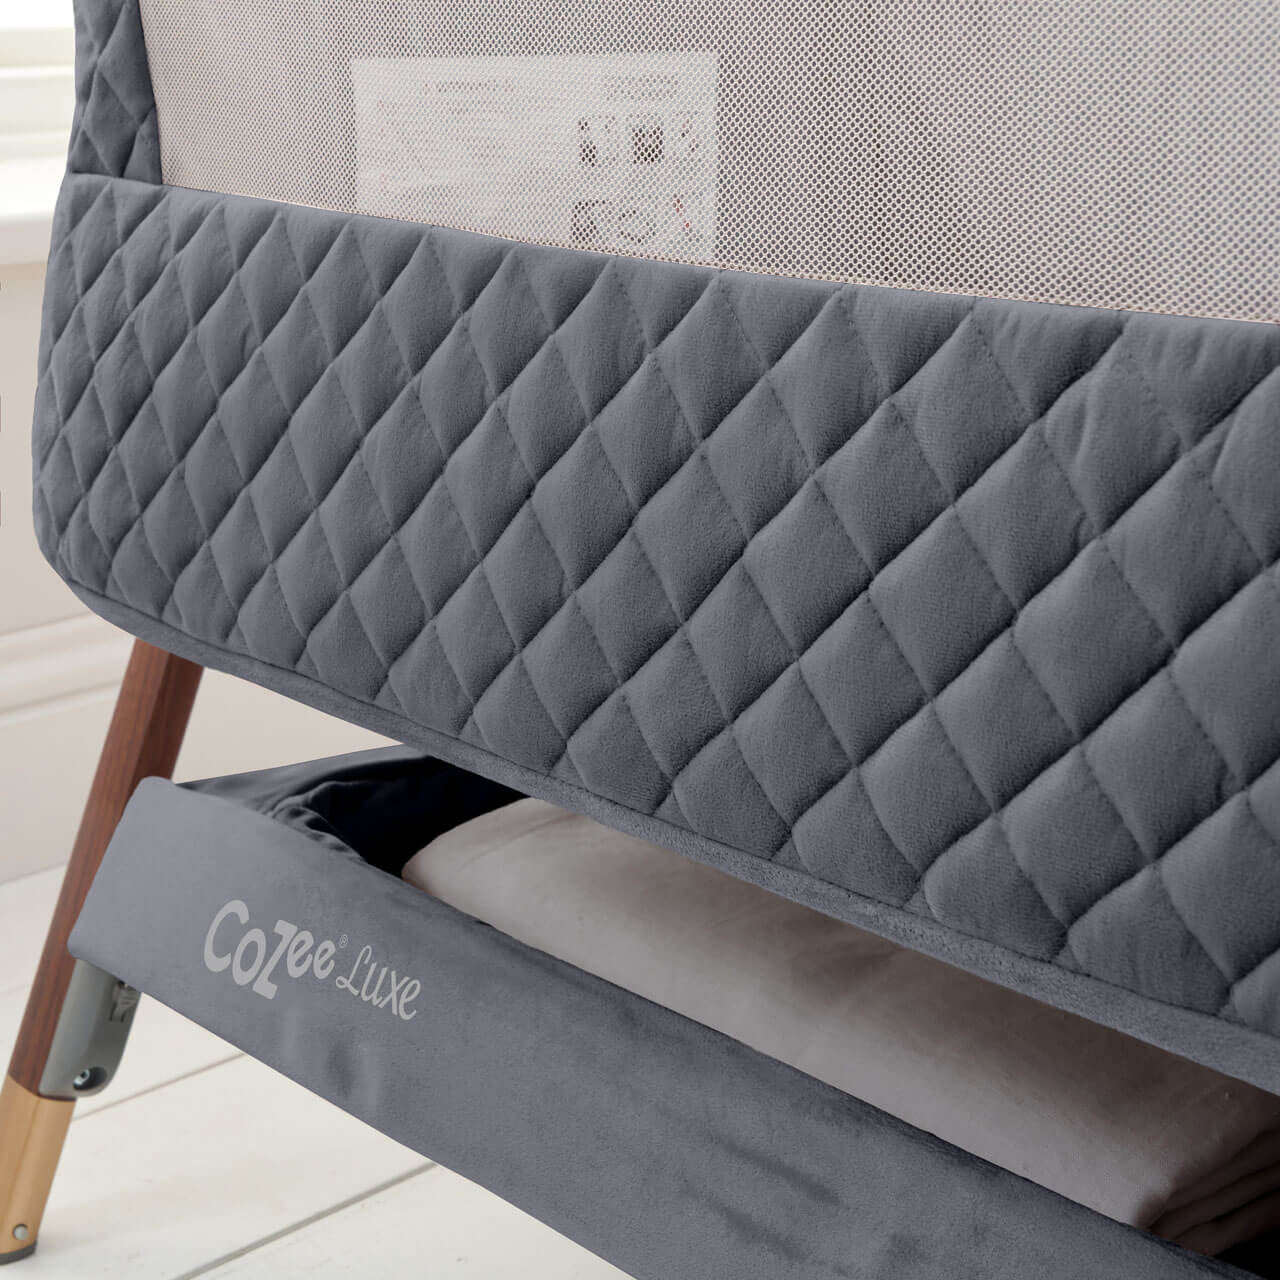 Tutti Bambini CoZee Luxe Bedside Crib - Walnut/Slate -  | For Your Little One